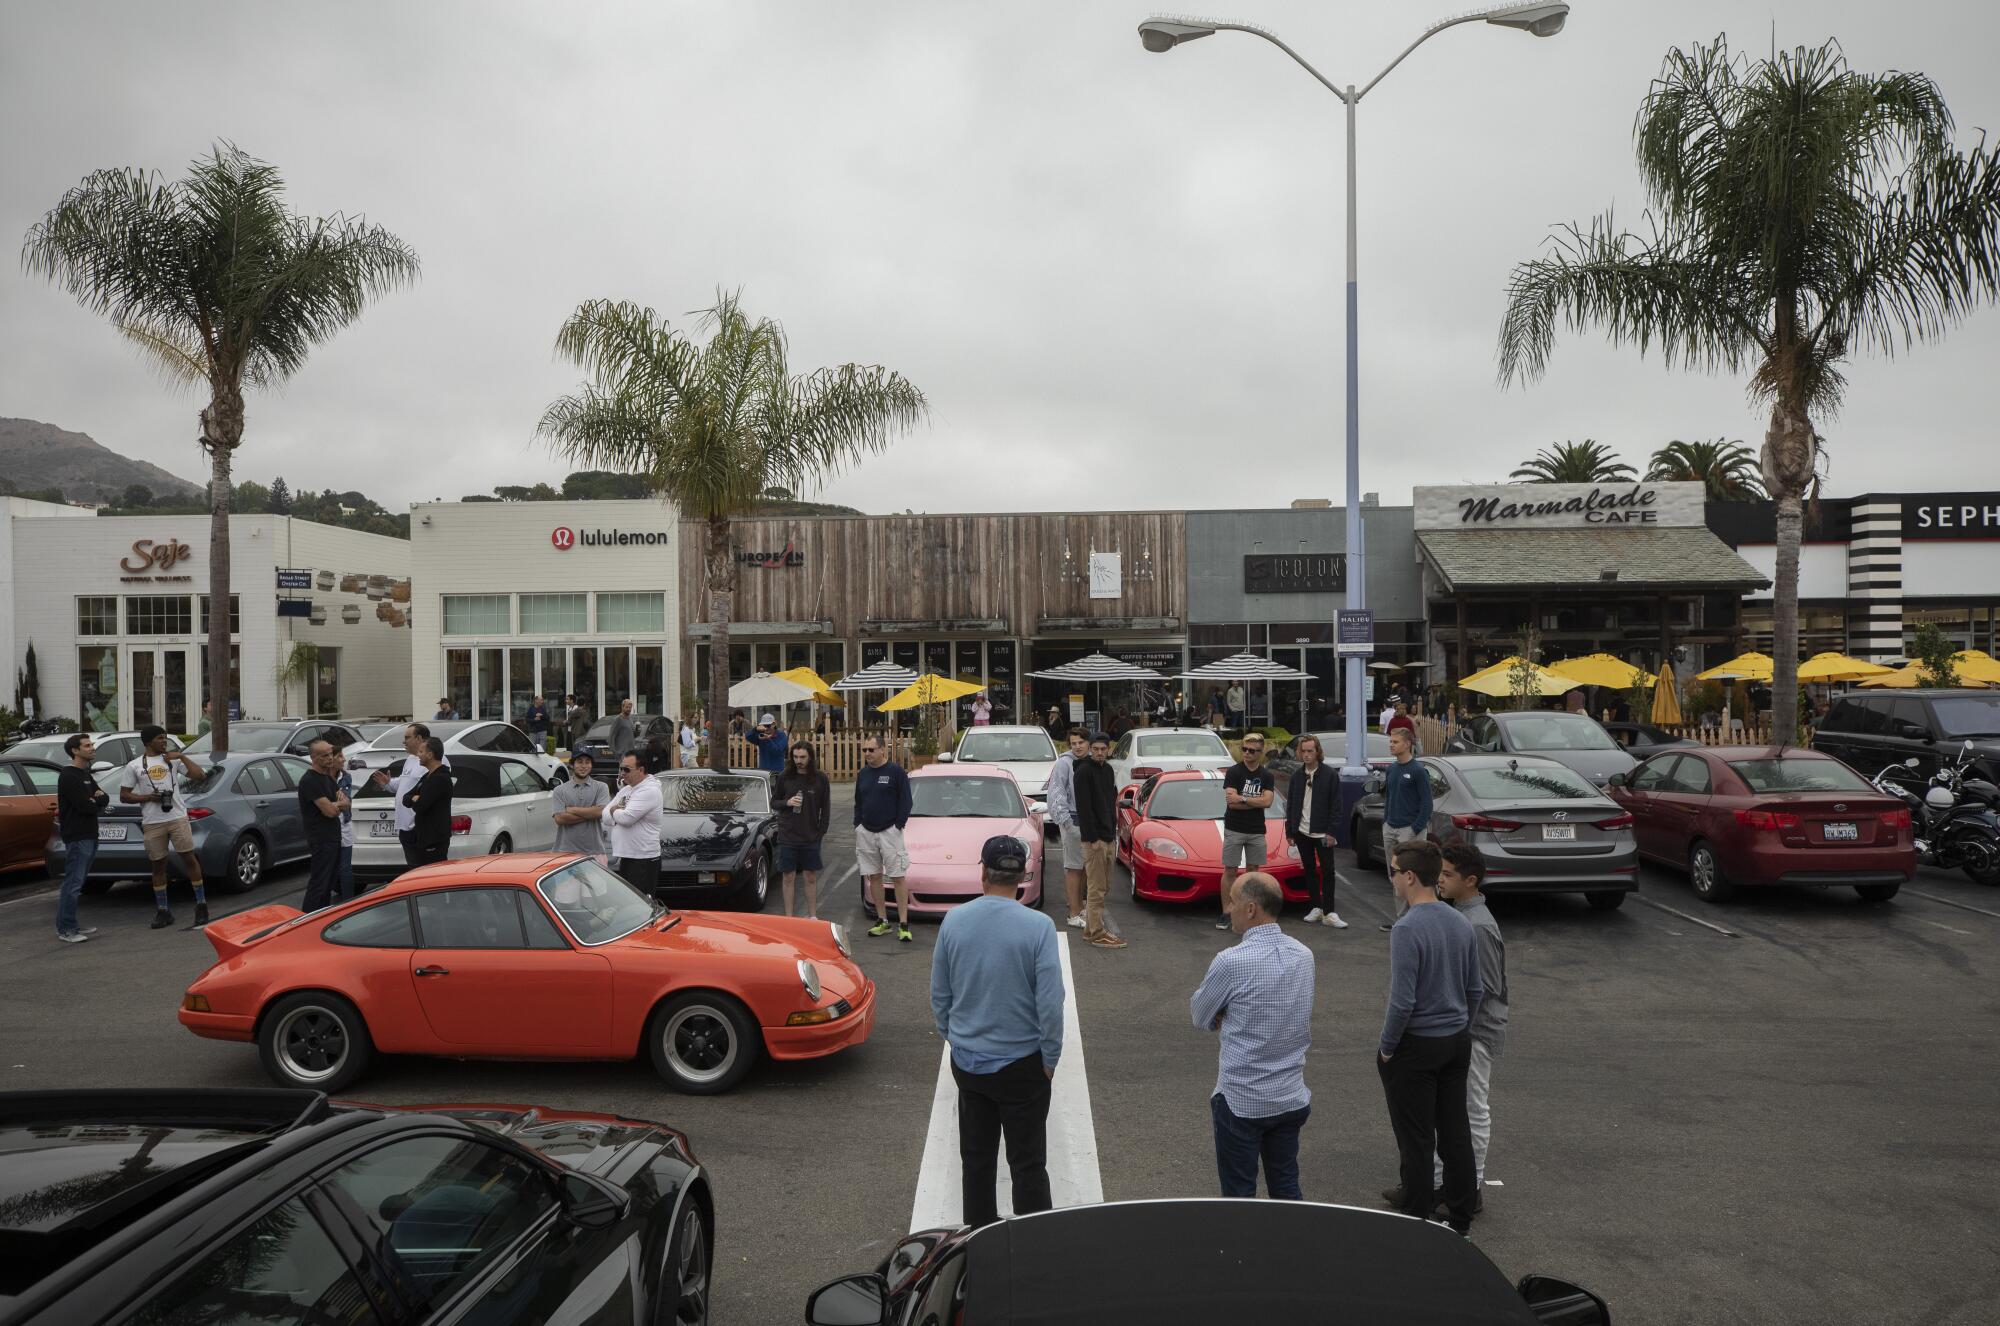 Auto enthusiasts gather at the Malibu Village Shopping Mall on Sept. 26.